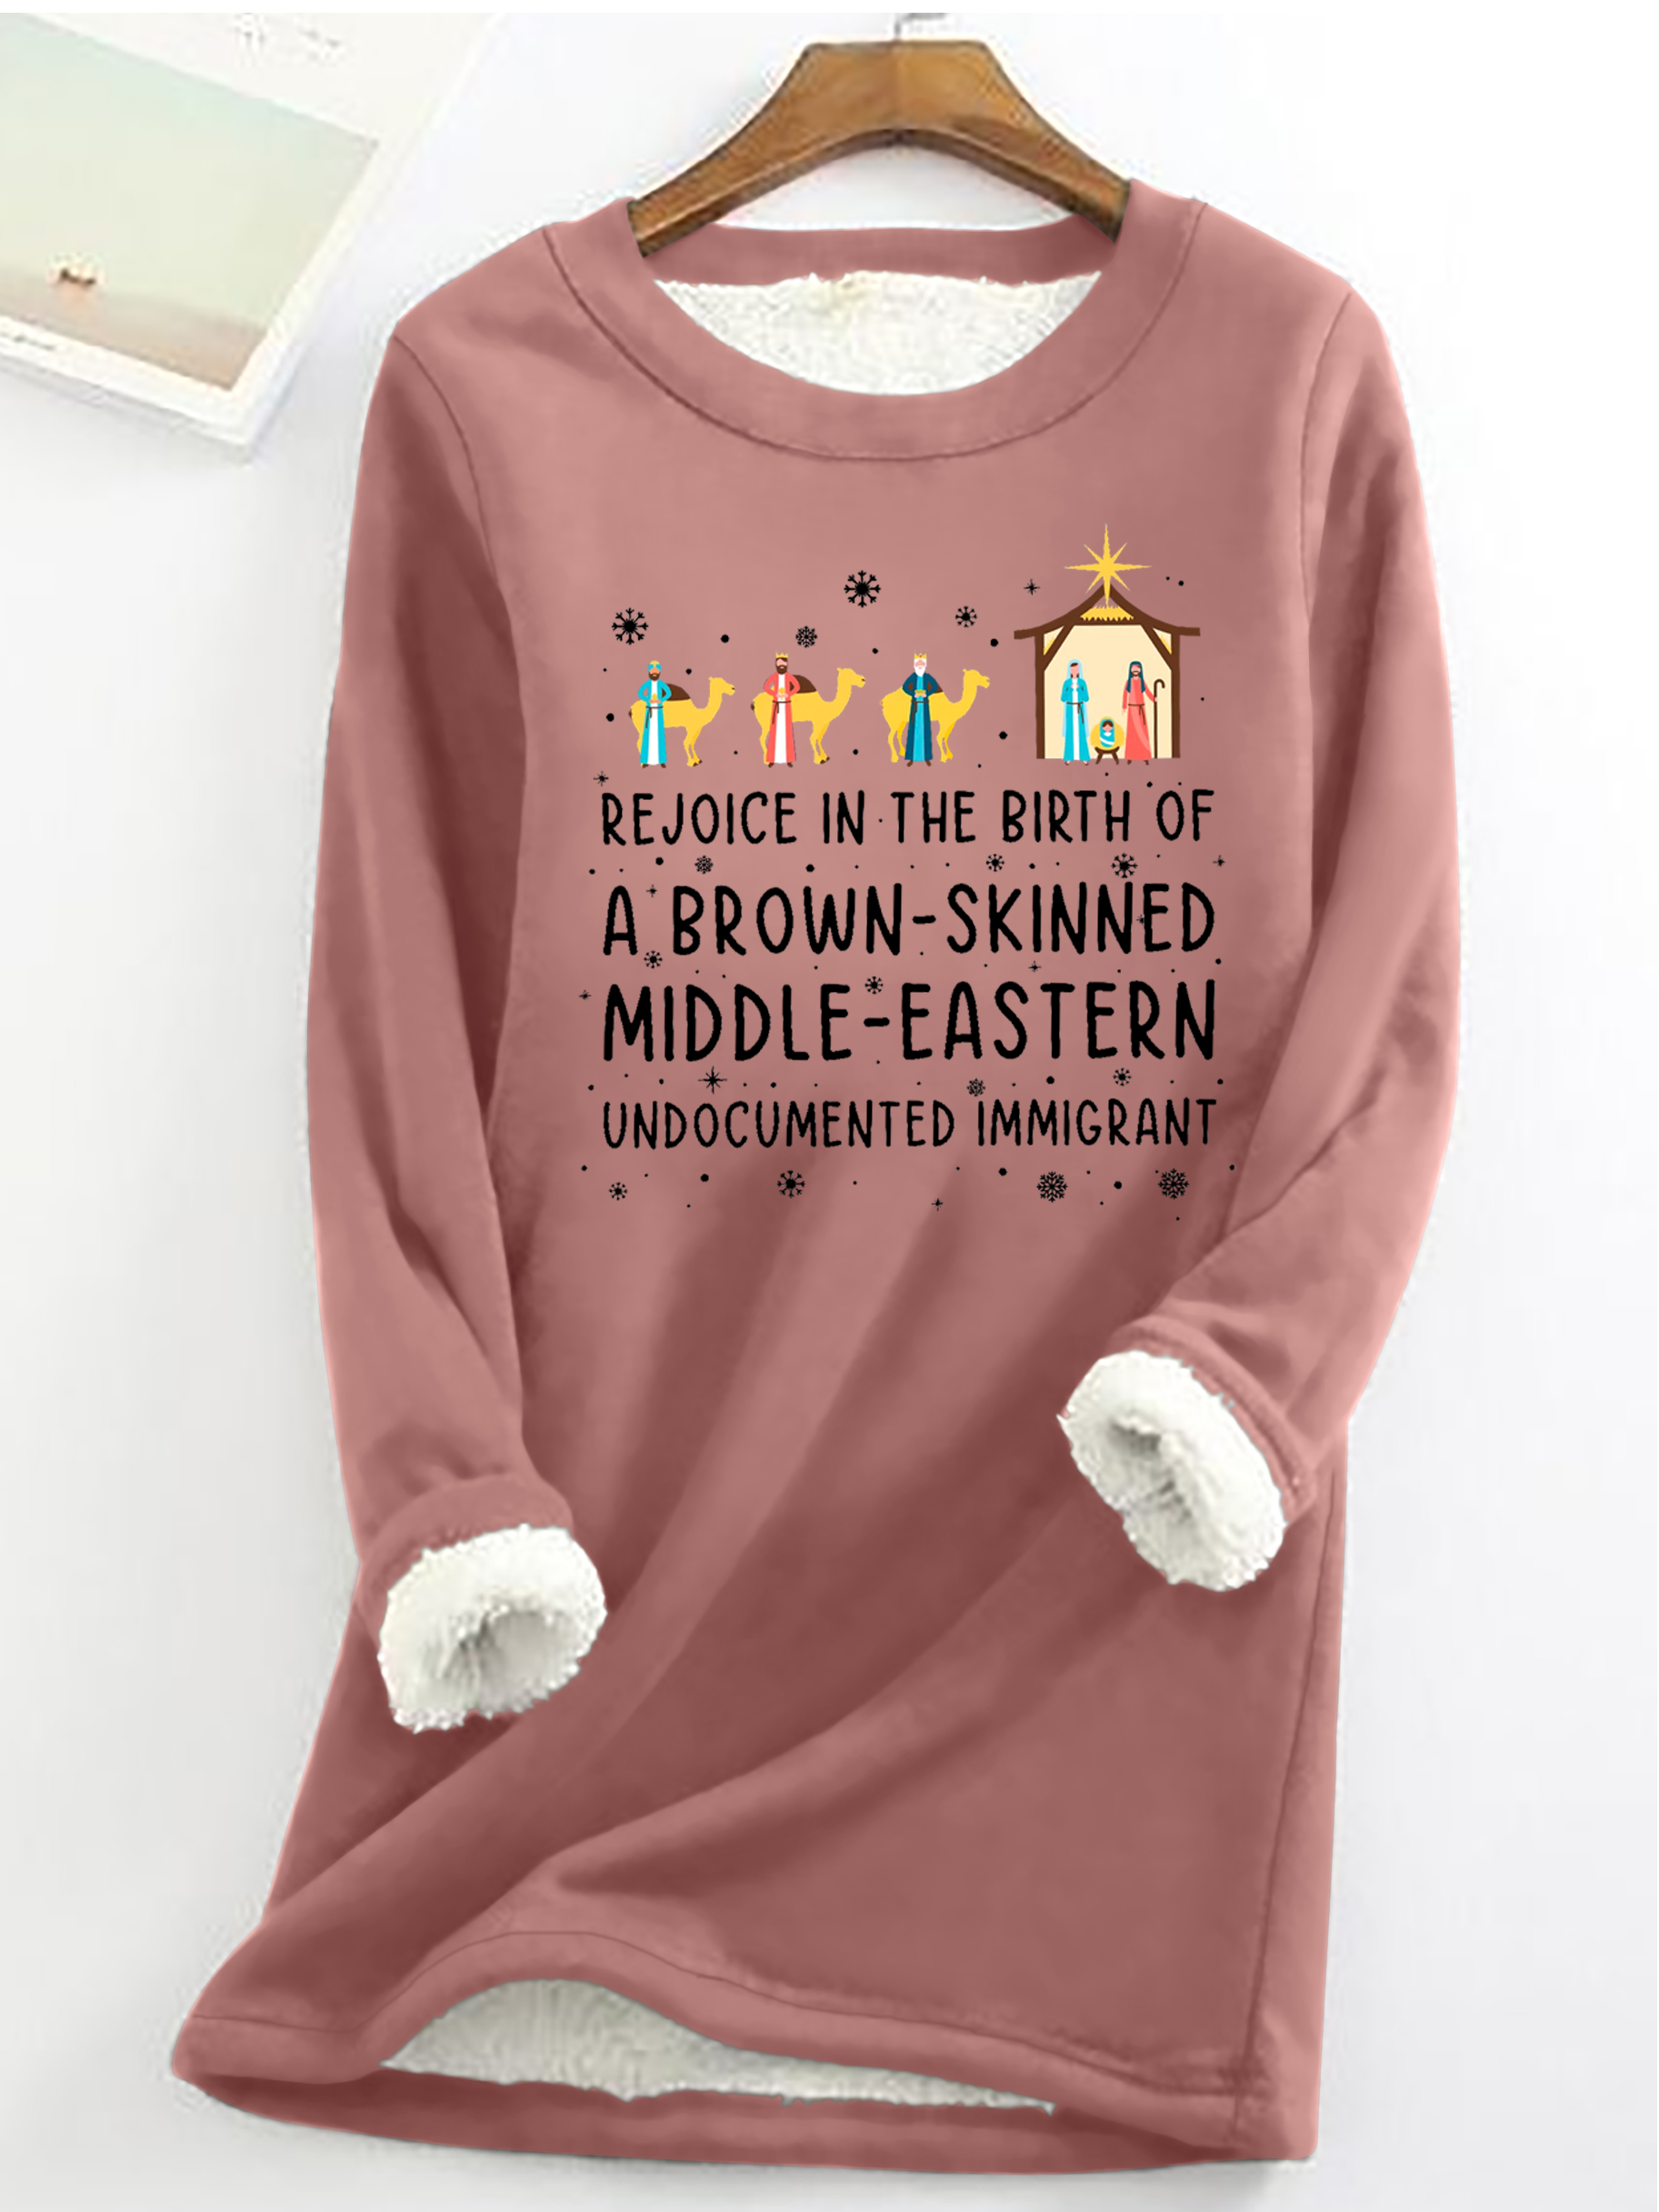 Rejoice In The Birth Of A Brown-Skinned Middle-Eastern Undocumented Immigrant Book Lovers Cotton-Blend Fleece Sweatshirt